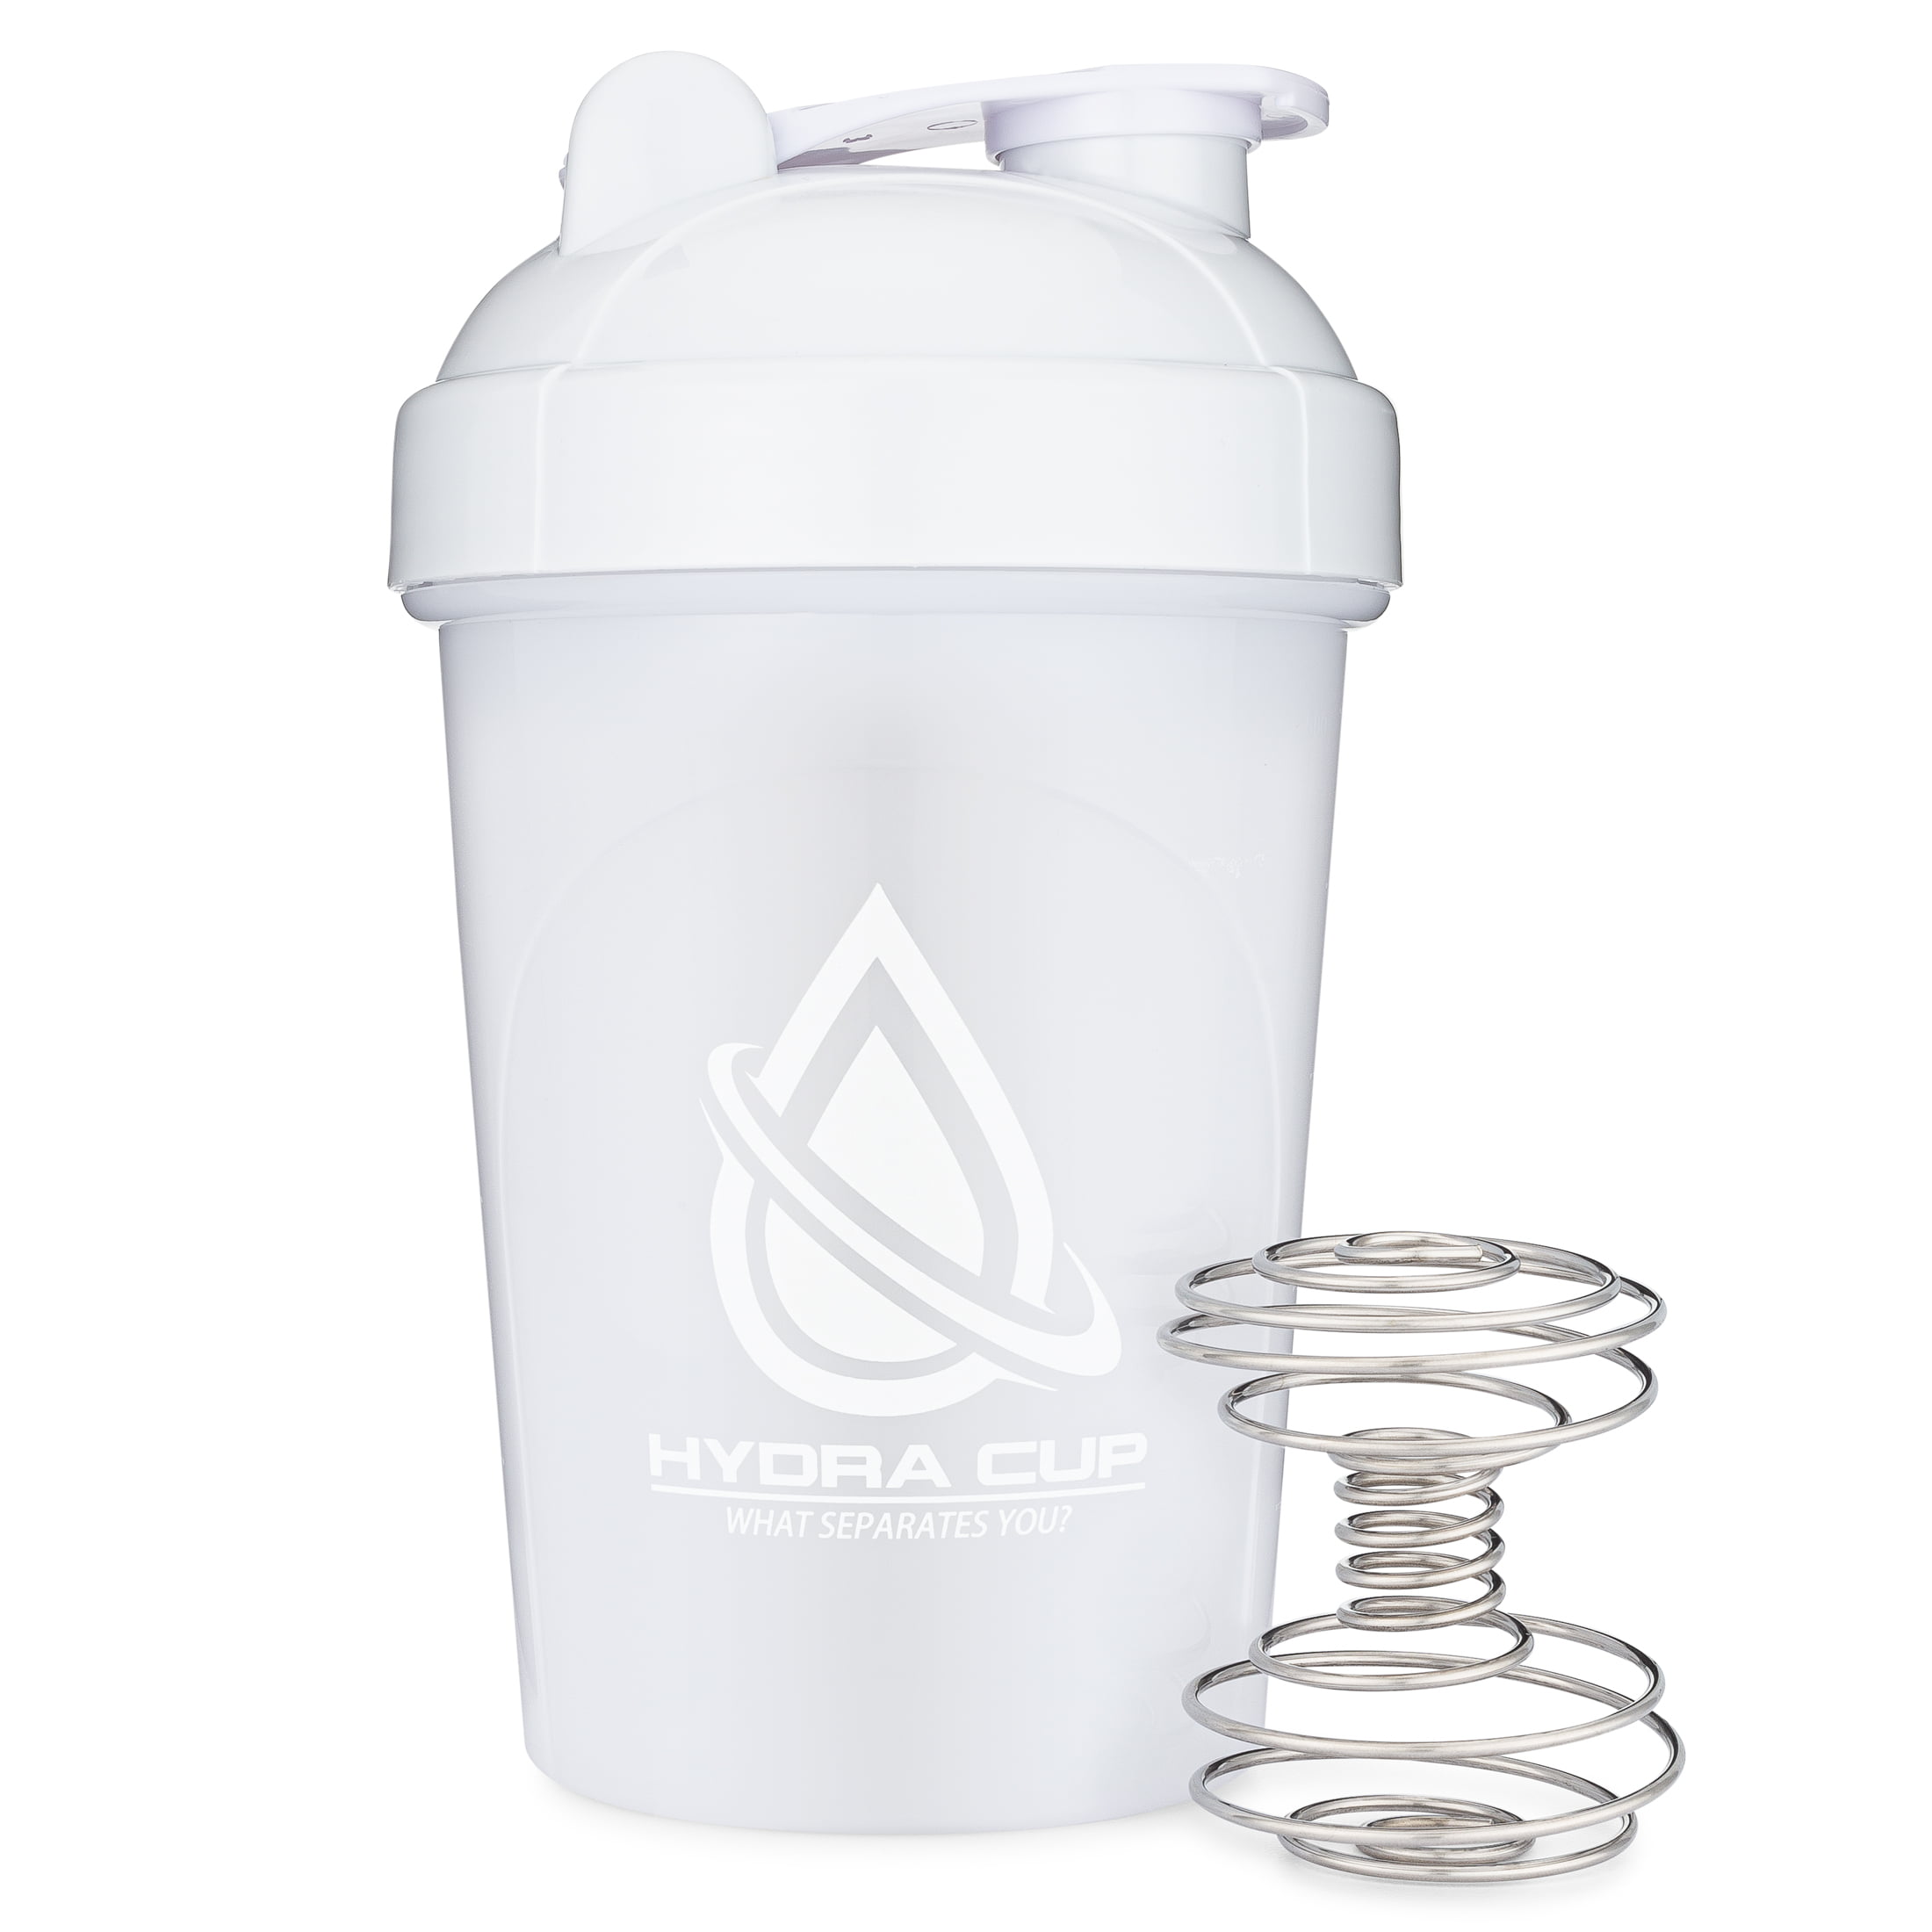 Hydra Cup Fuel Hydrate 22oz 14oz Mixer Shaker Water Bottle